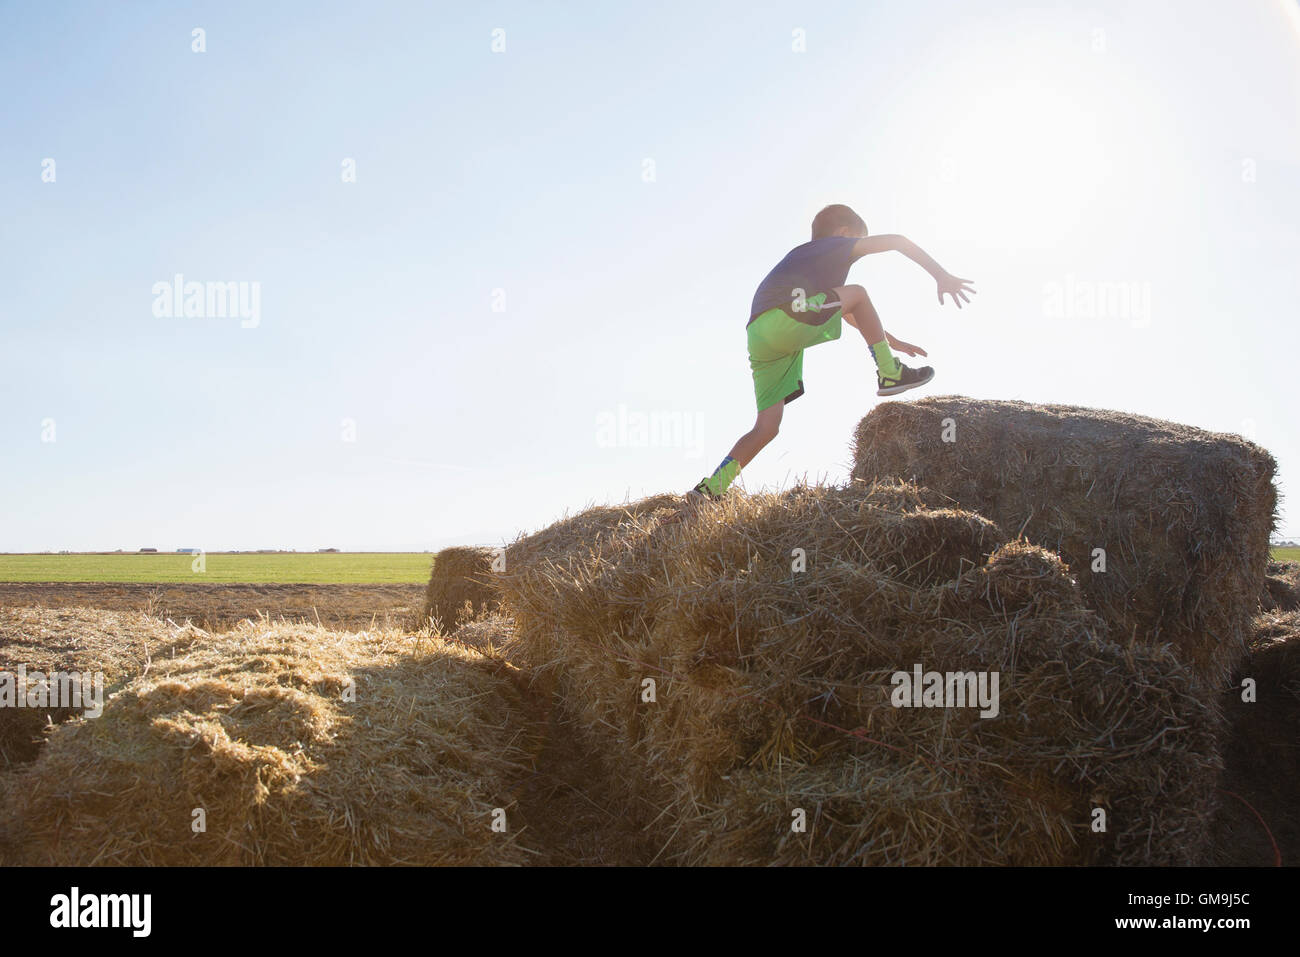 Boy (6-7) jumping on bale of hay Stock Photo